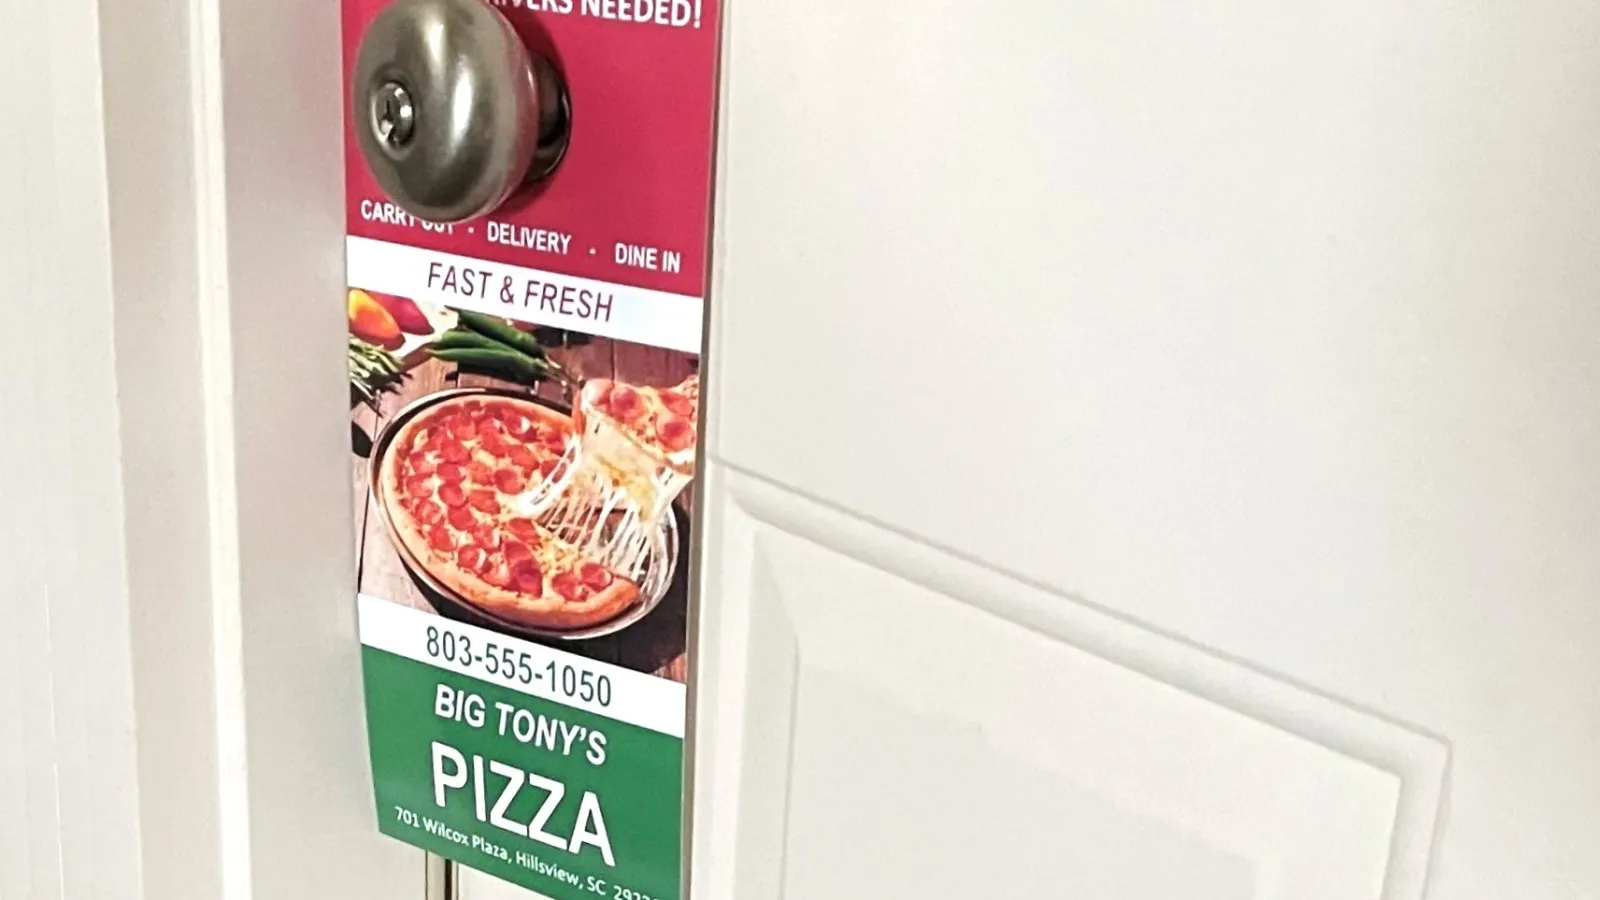 A colorful Door Hanger advertising a Pizza Restaurant